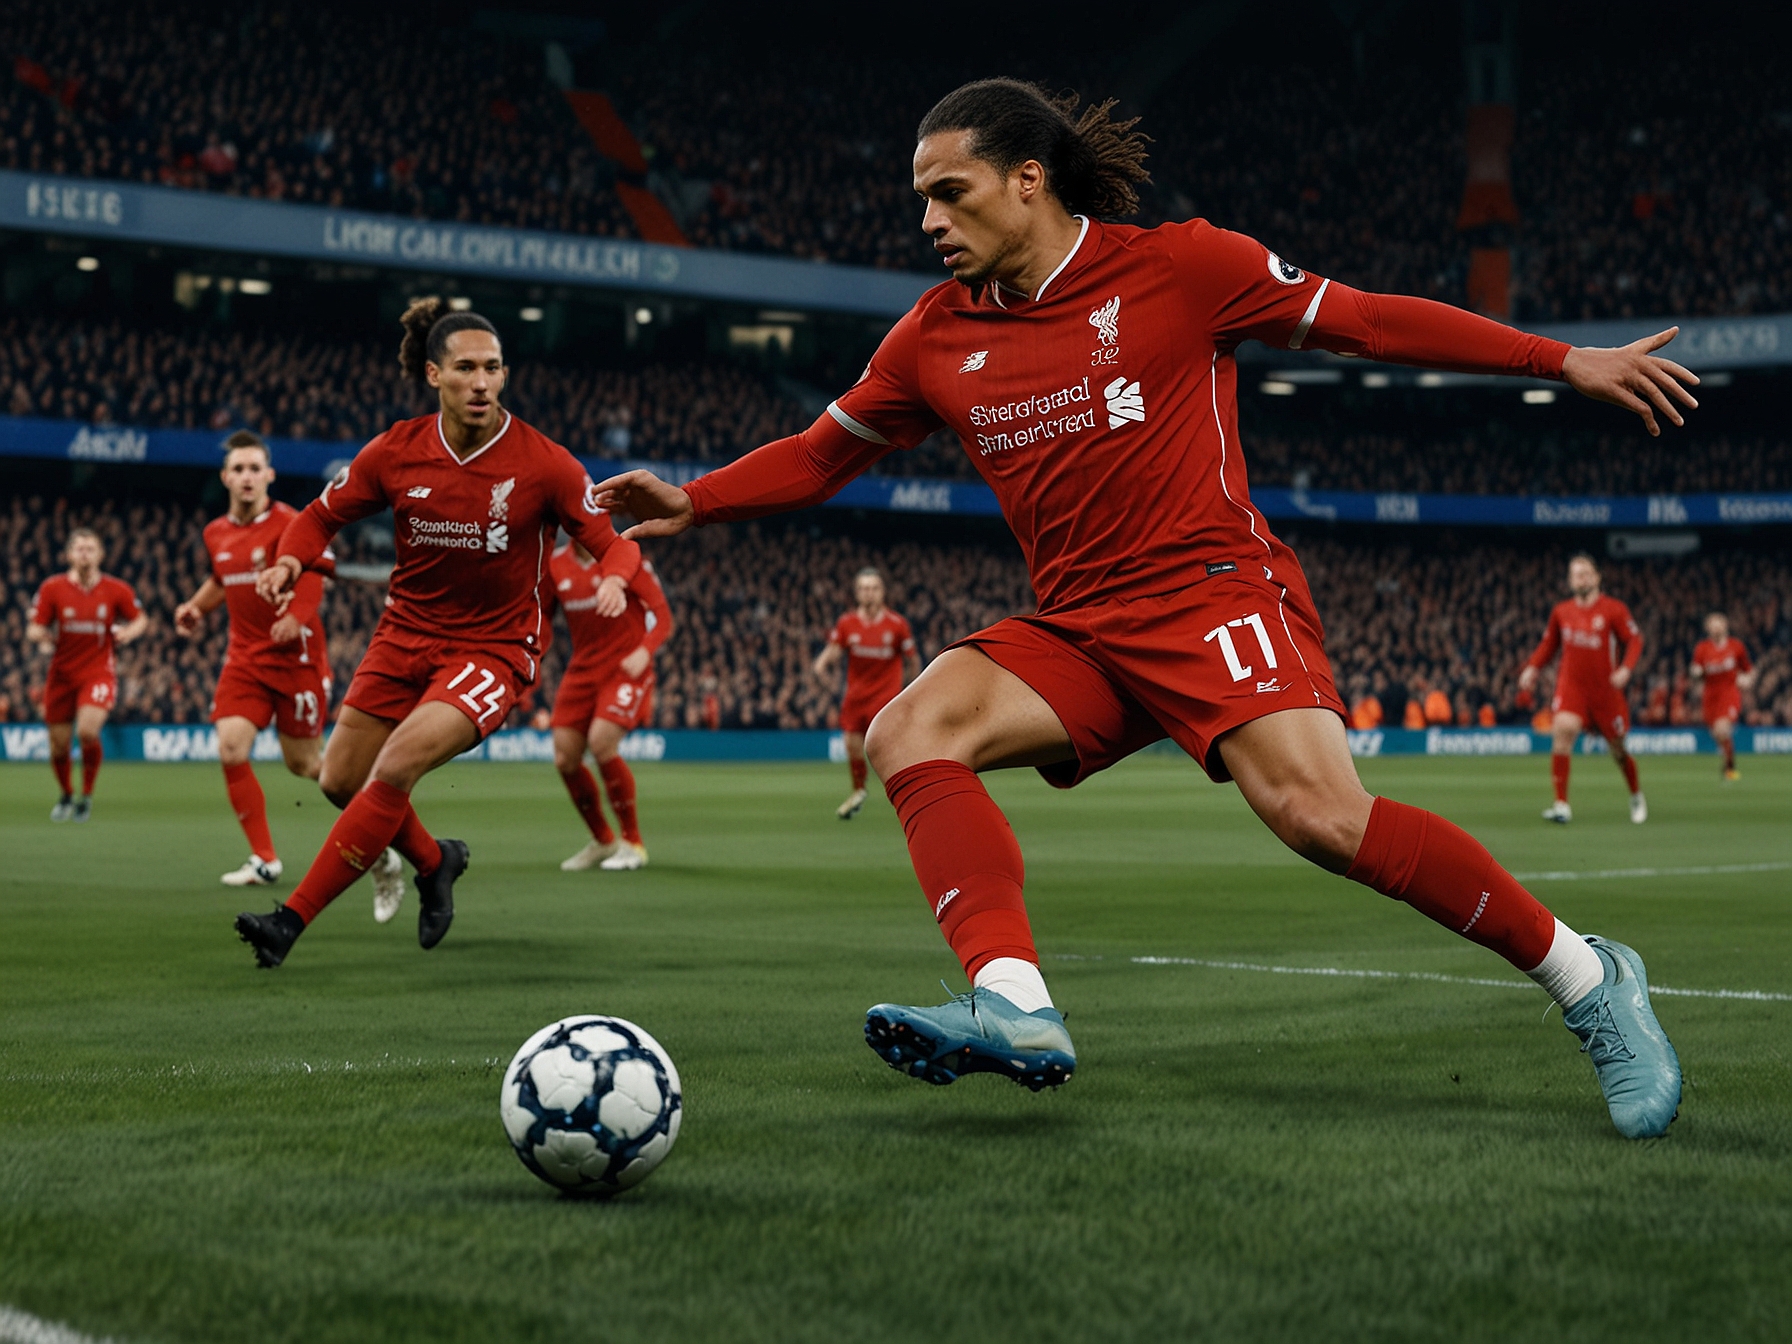 Visual representation of Liverpool's defense, focusing on Virgil van Dijk's critical role and what losing him could mean for the team's stability.